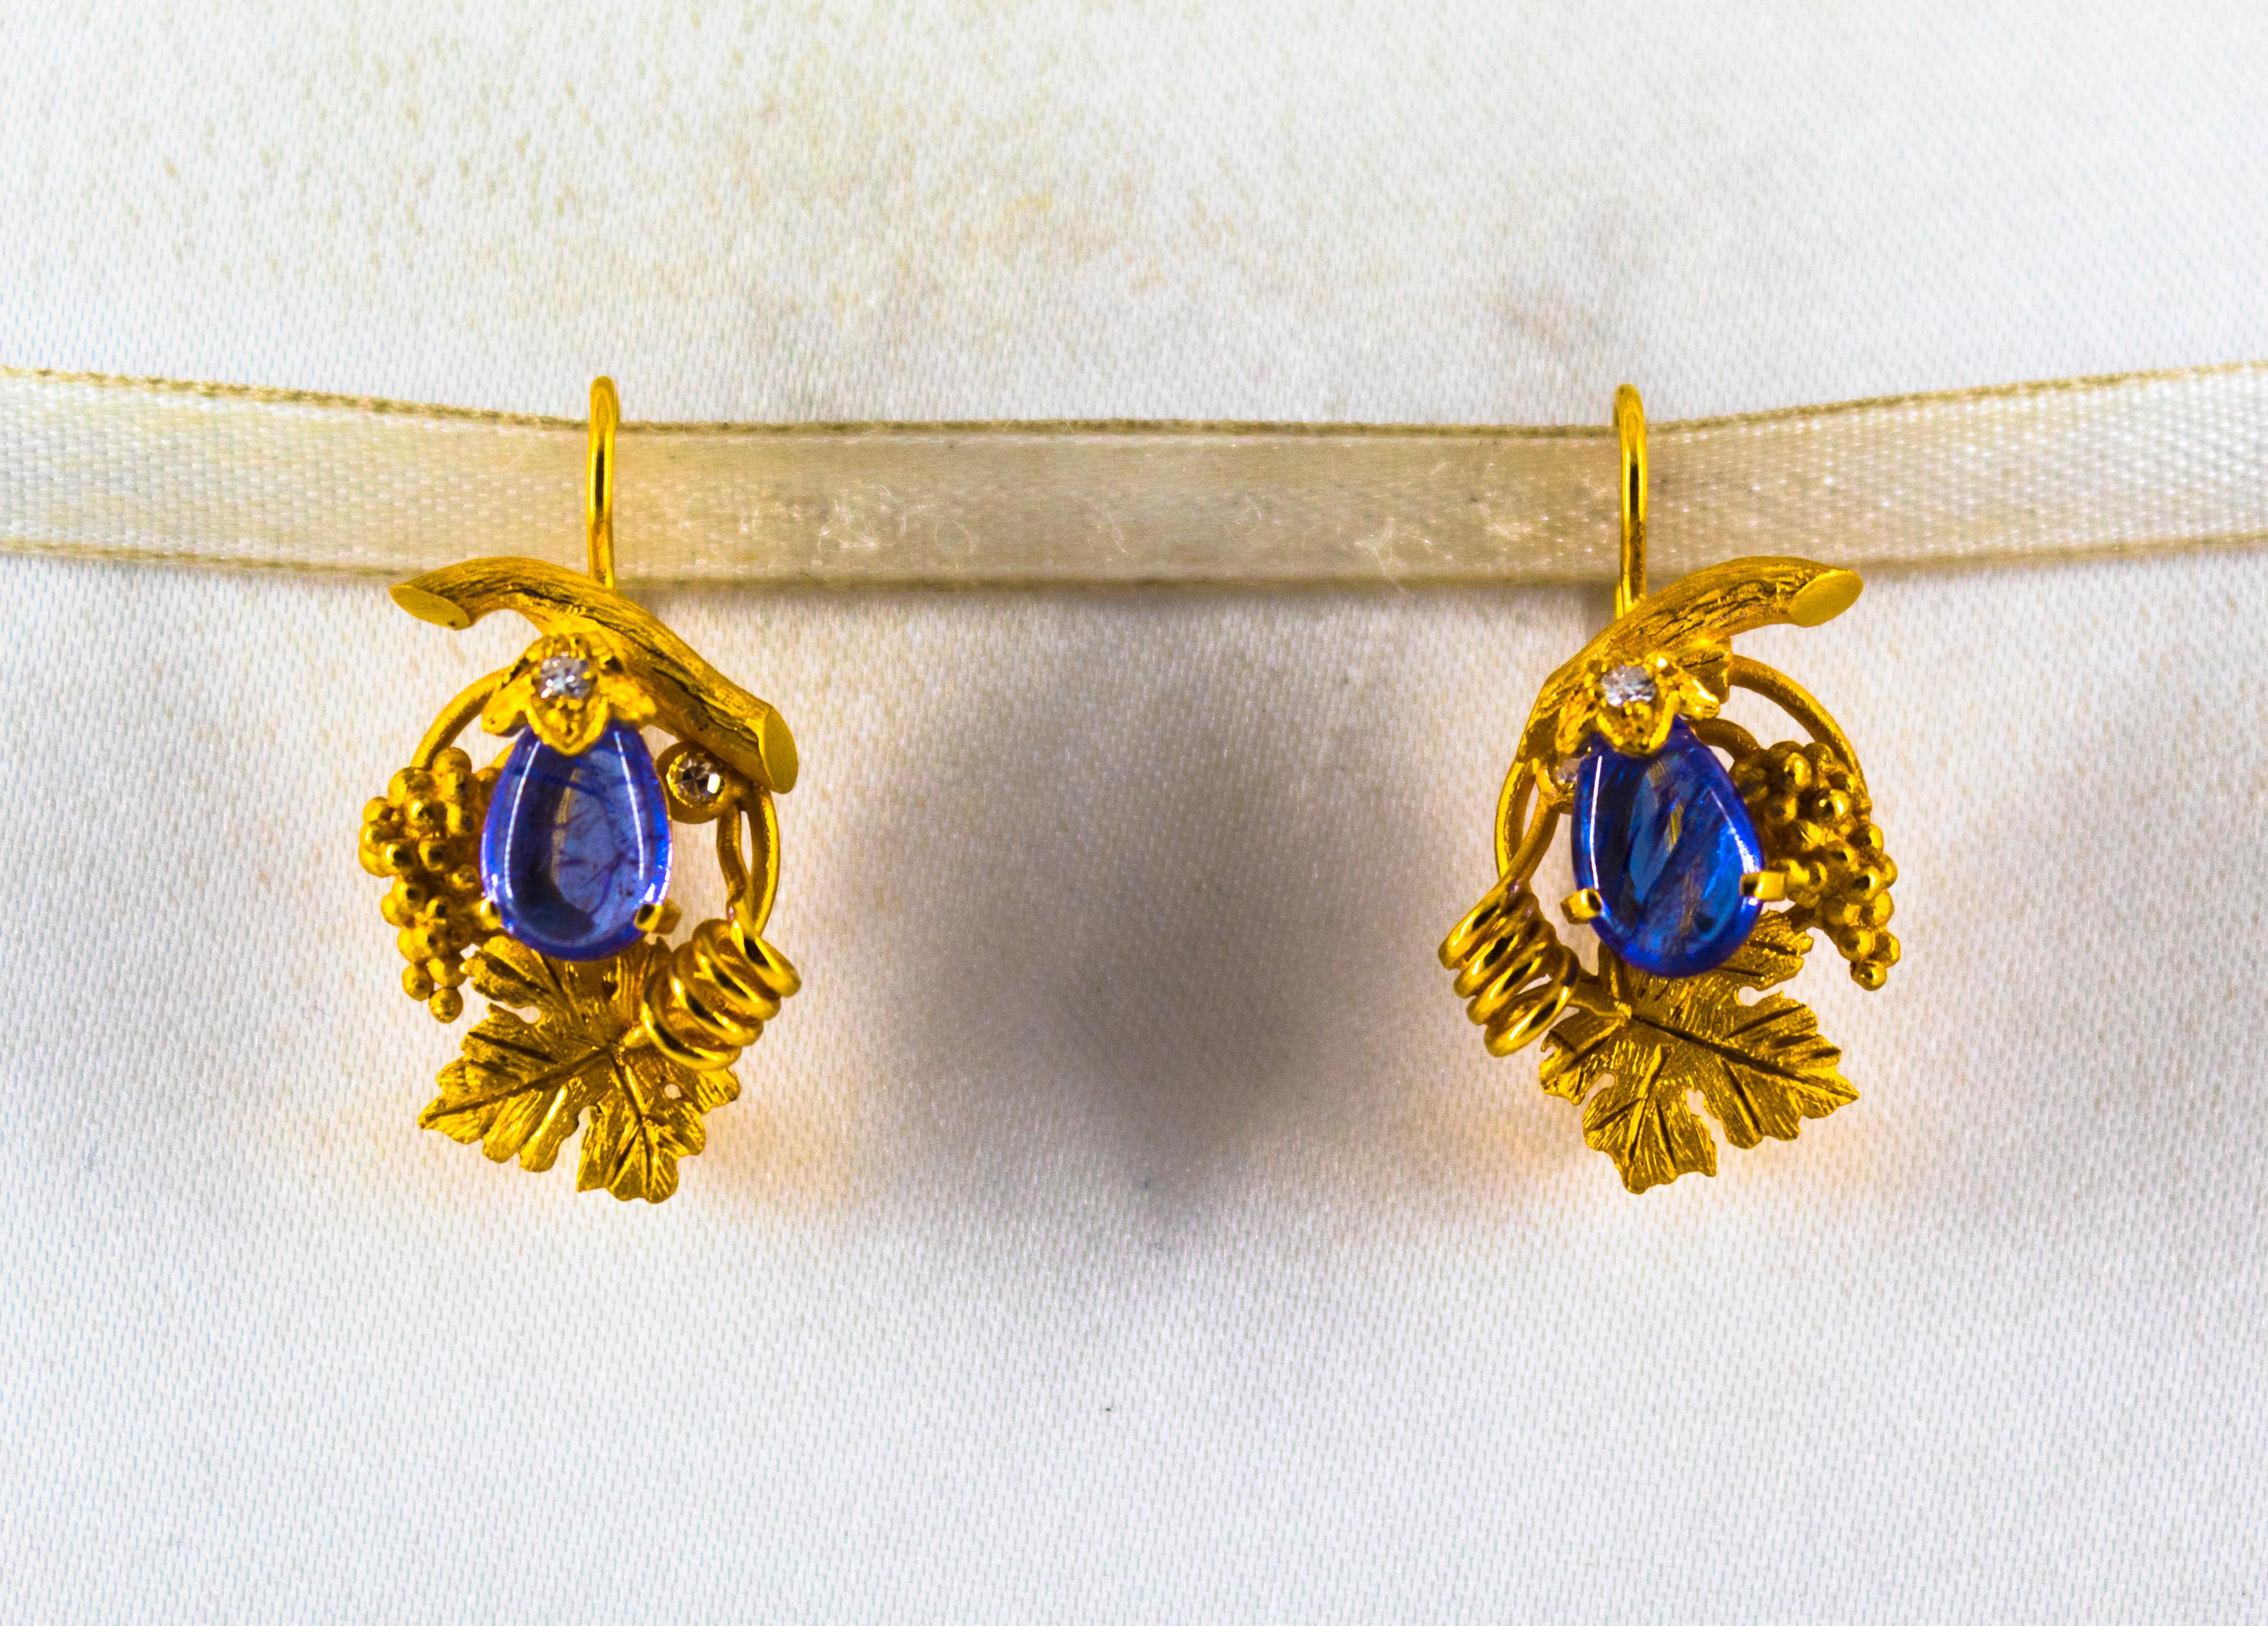 These Earrings are made of 14K Yellow Gold.
These Earrings have 0.12 Carats of White Diamonds.
These Earrings have 5.00 Carats of Tanzanite.
These Earrings are available also with Aquamarine.
These Earrings are inspired by Art Nouveau.
All our